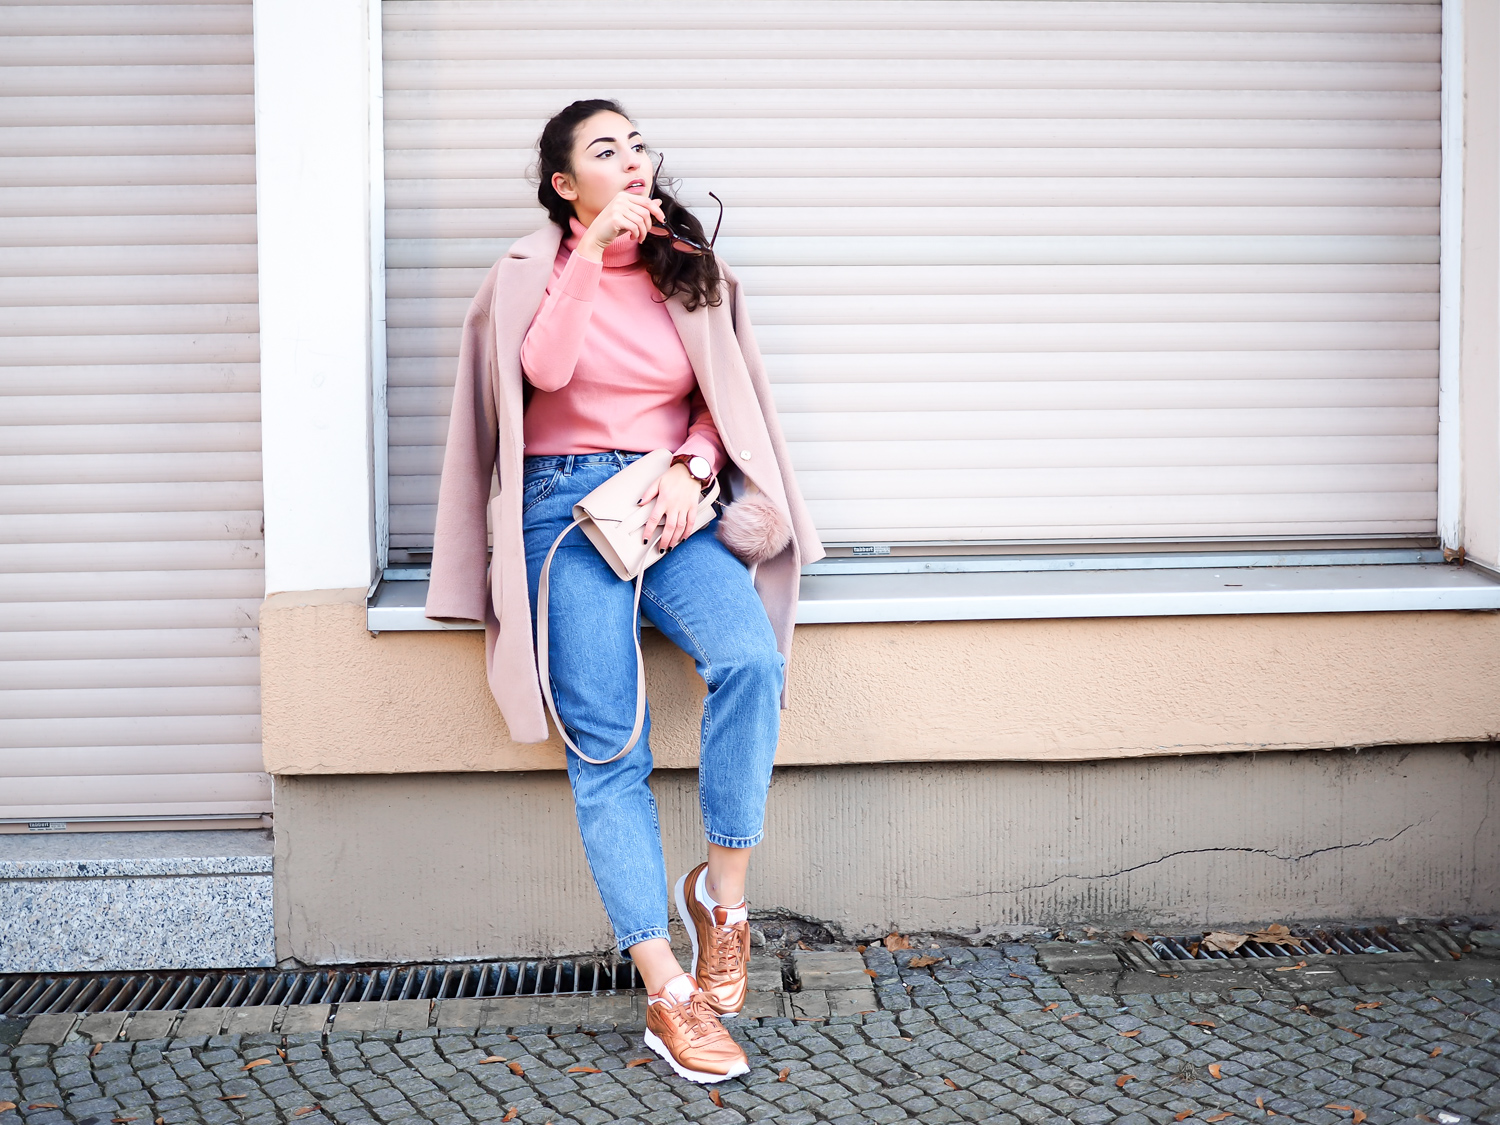 pink coat copper reeboks faces of stockholm pull and bear mom jeans sneaker girl look gerry weber candy colors sweater winter look samieze fashionblogger modeblog berlin-13